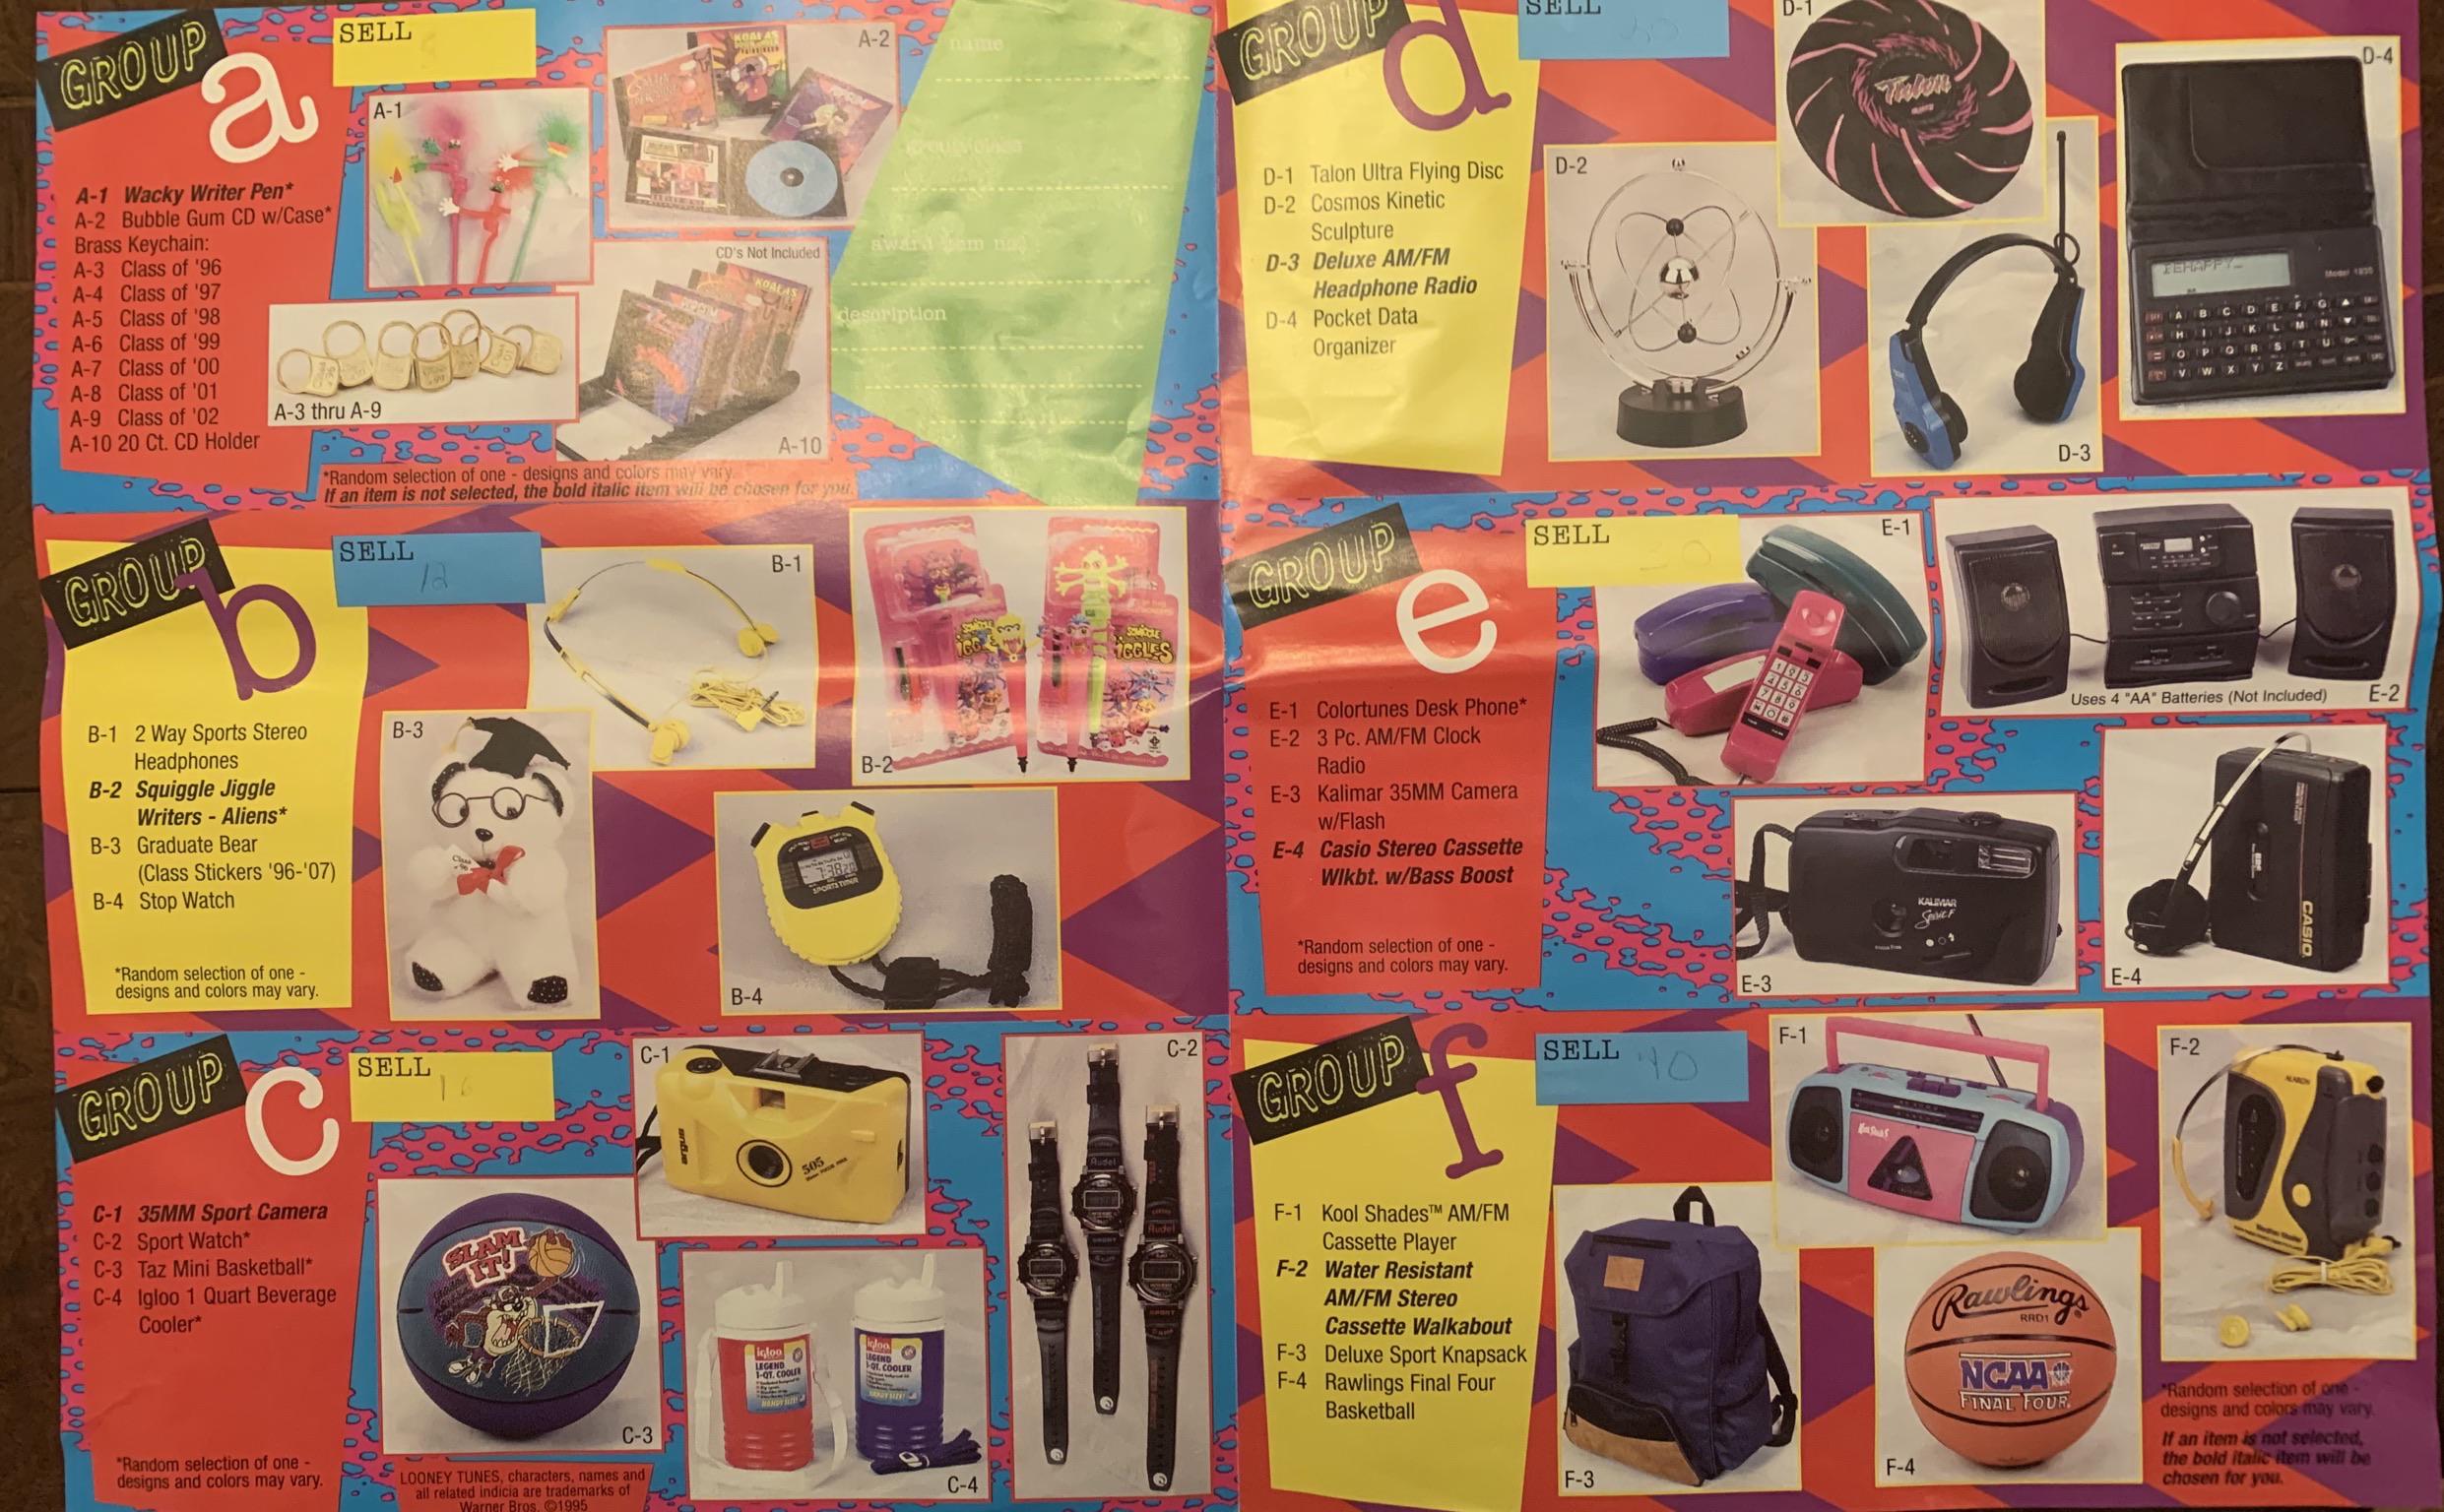 The prize catalogs for school fundraisers : r/nostalgia